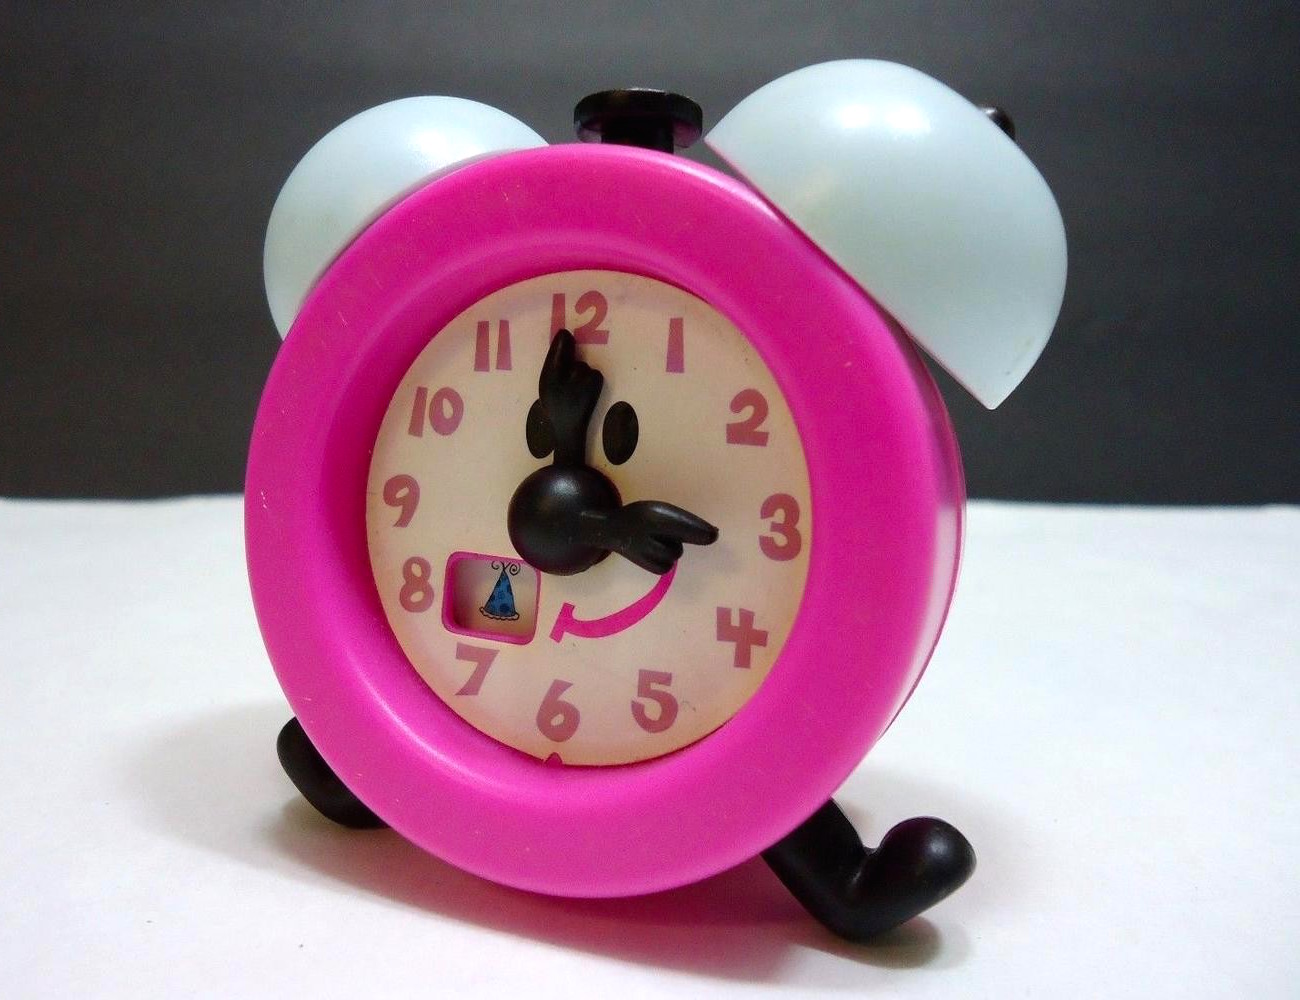 Download Image - Blue's Clues Tickety Tock Clock Toy - Subway 1998.jpg | Blue's Clues Wiki | FANDOM ...